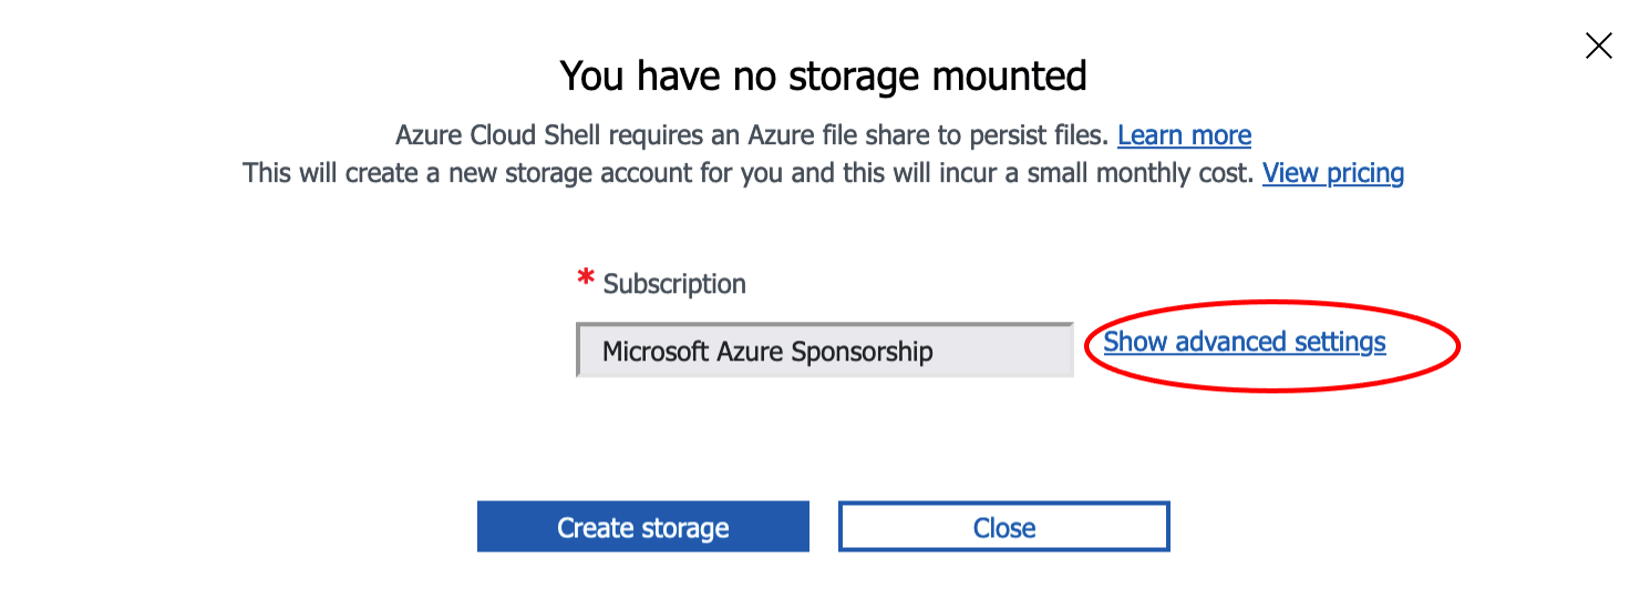 Creating storage for Azure Cloud Shell